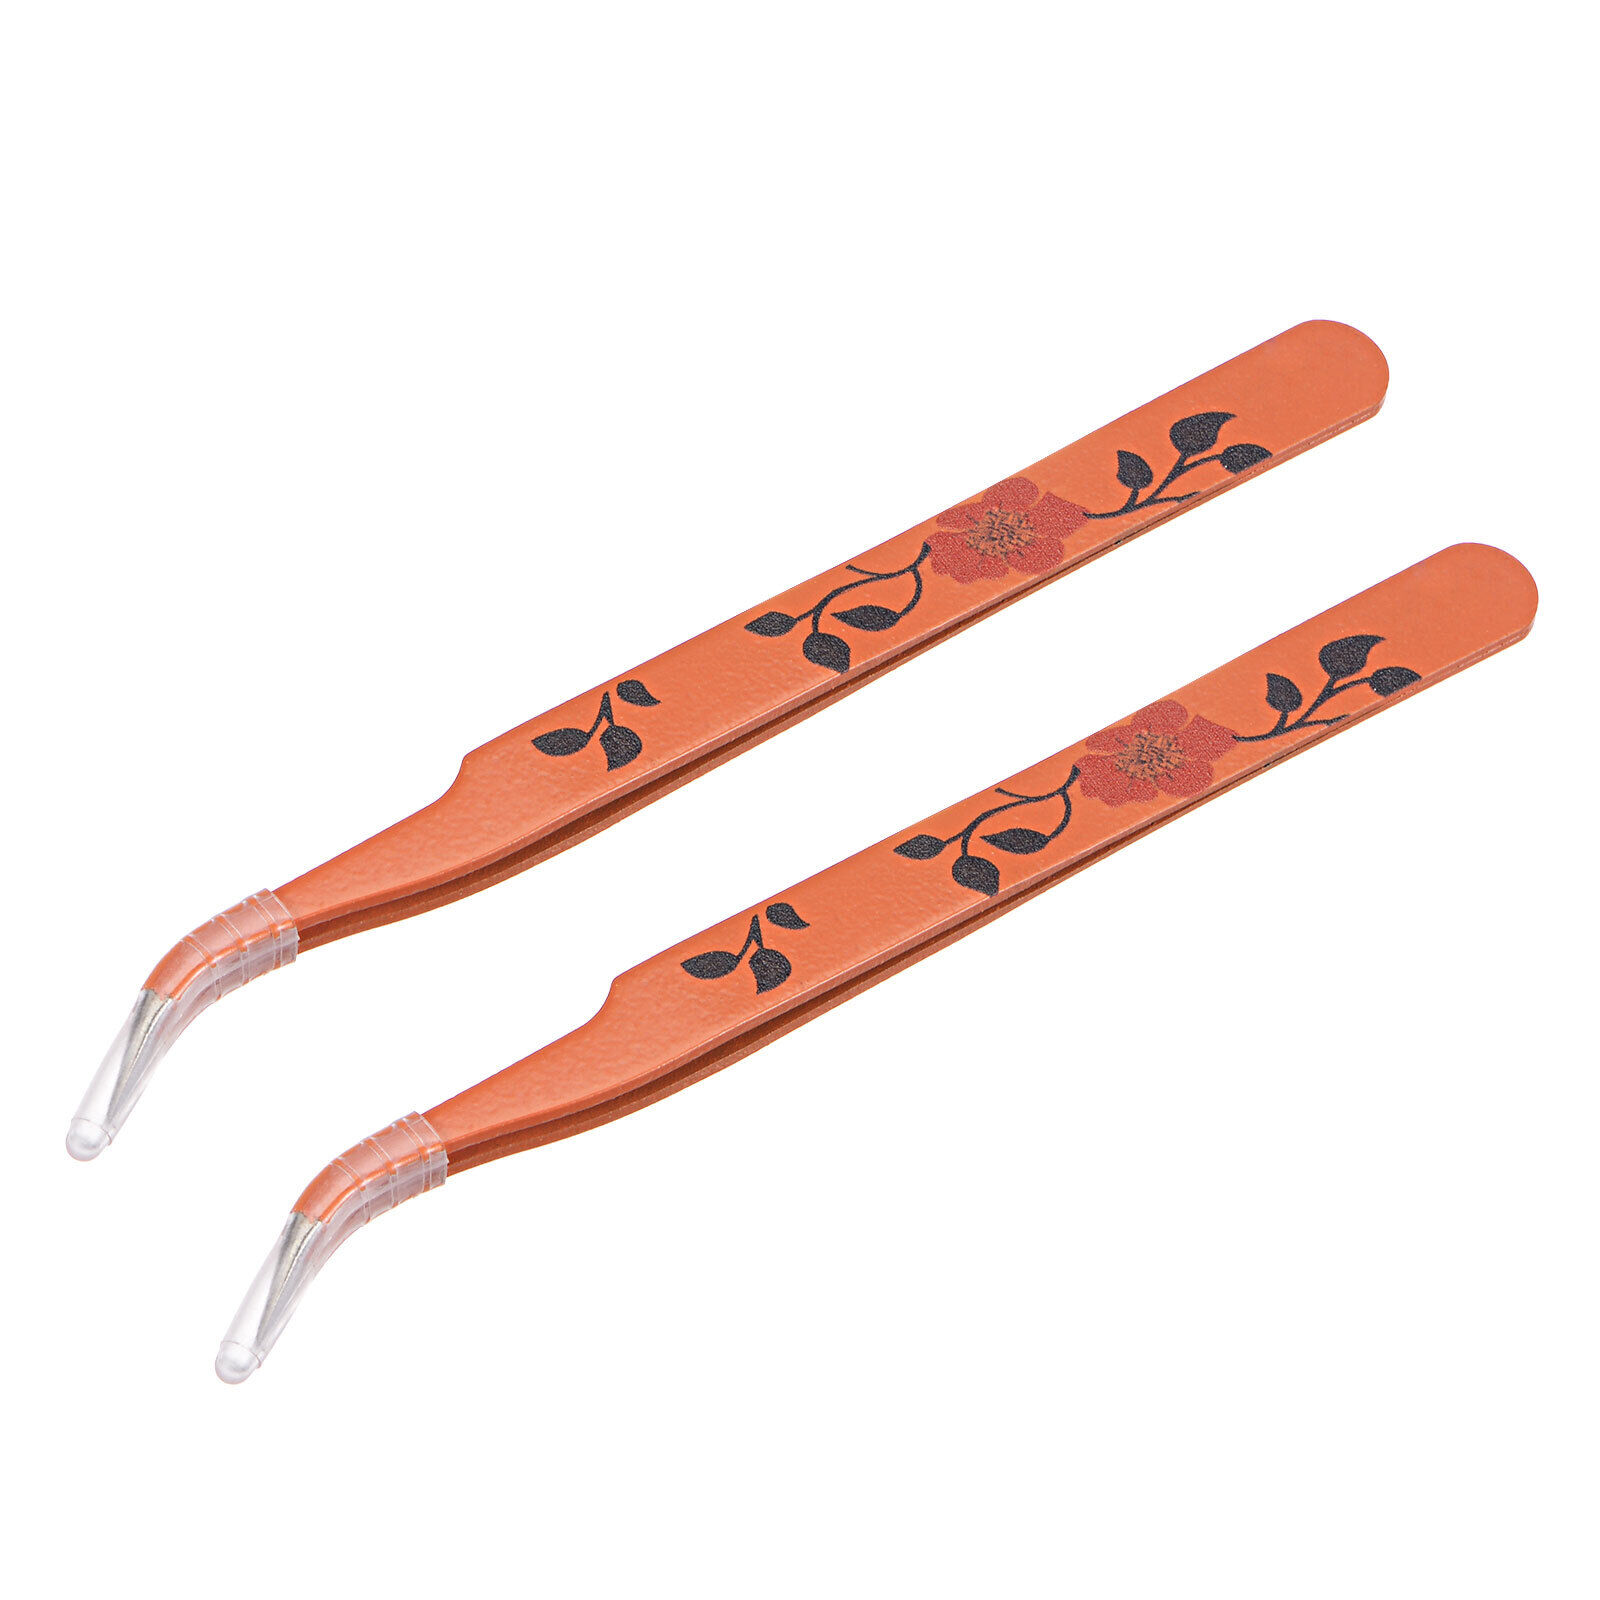 Precision Curved Tip Tweezer Stainless Steel Coral With Flower Print 2pcs